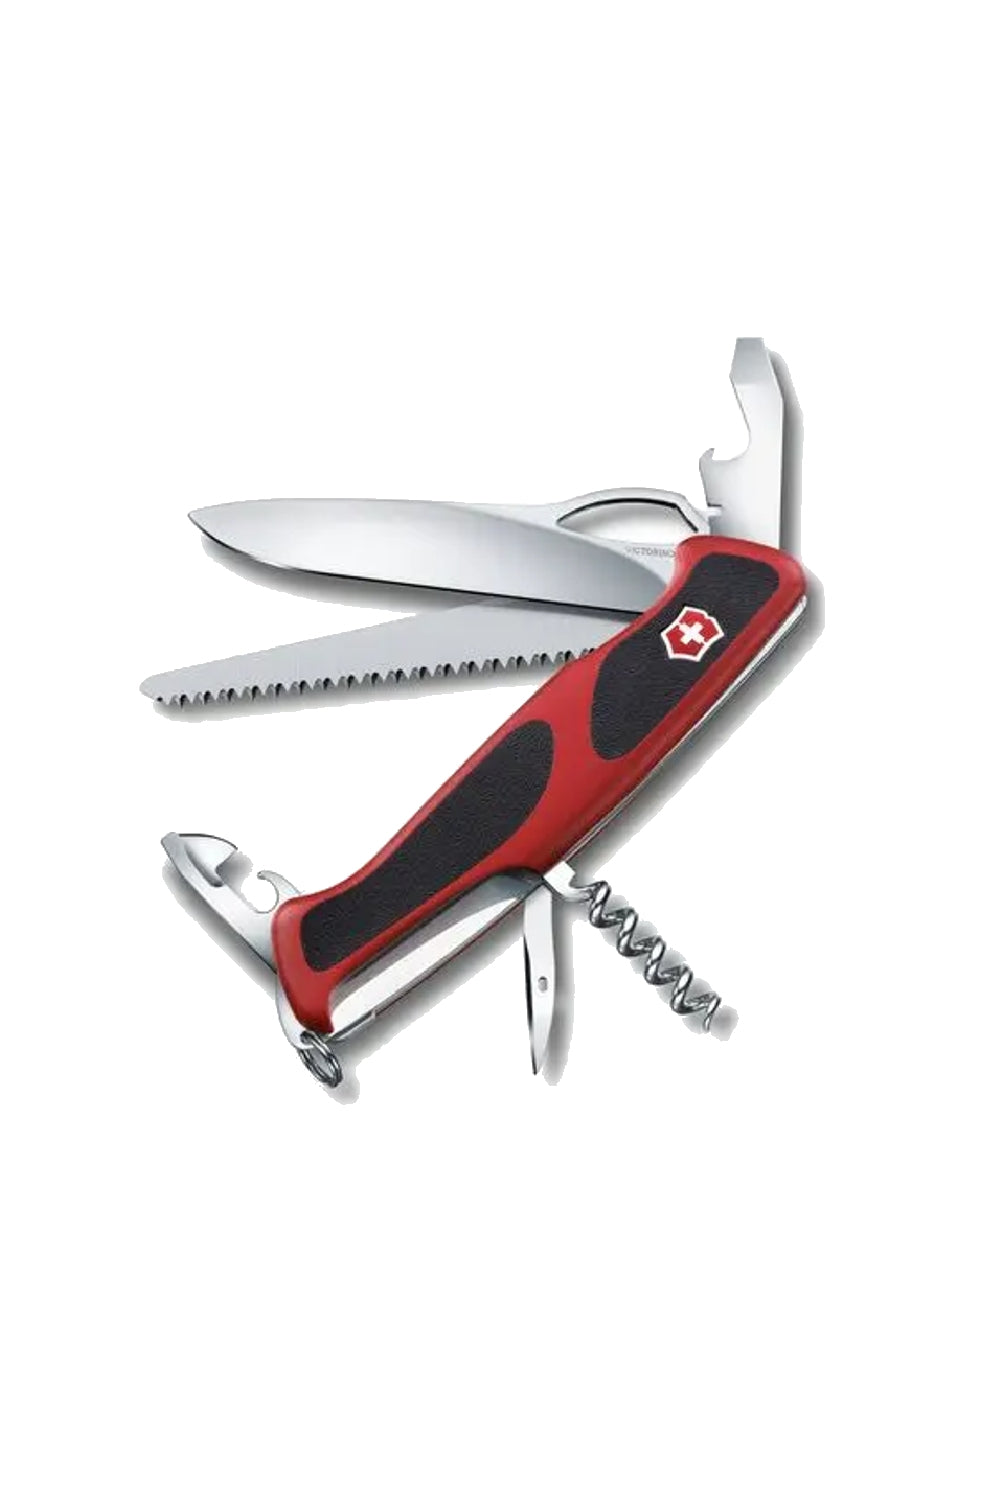 Victorinox Ranger 79M Grip Swiss Army Large Pocket Knife with Wood Saw in Red/Black